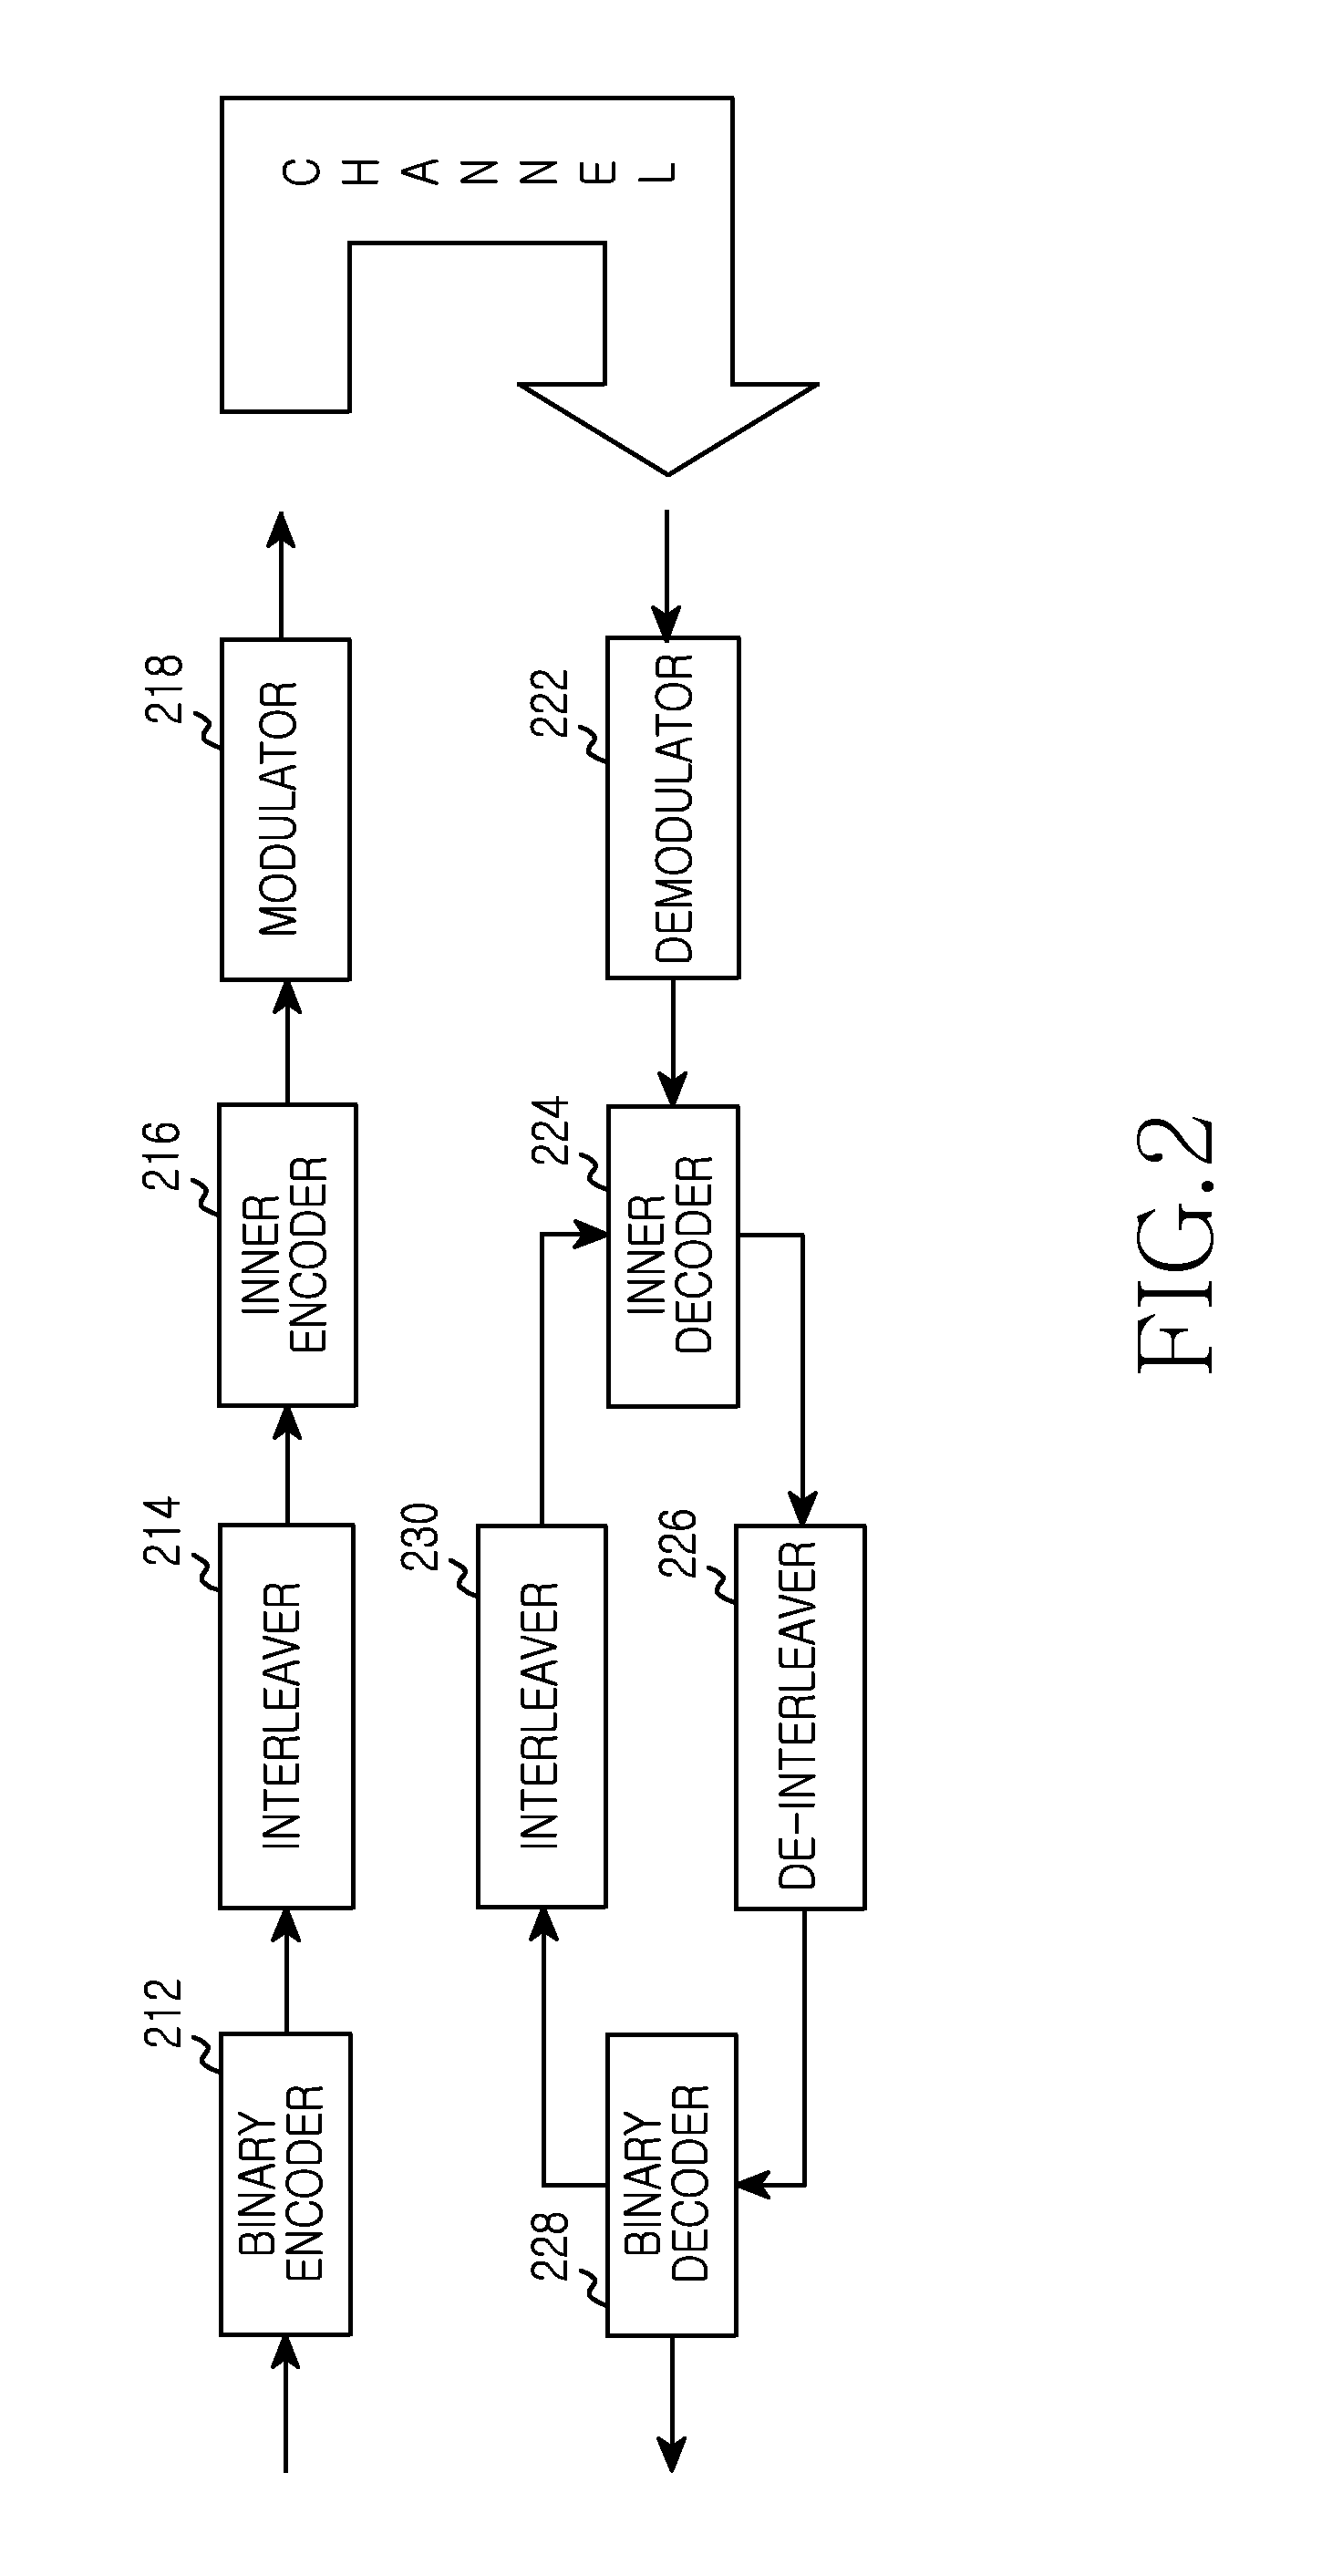 Apparatus and method for adaptively selecting channel code based on non-gaussianity of channel in wireless communication system